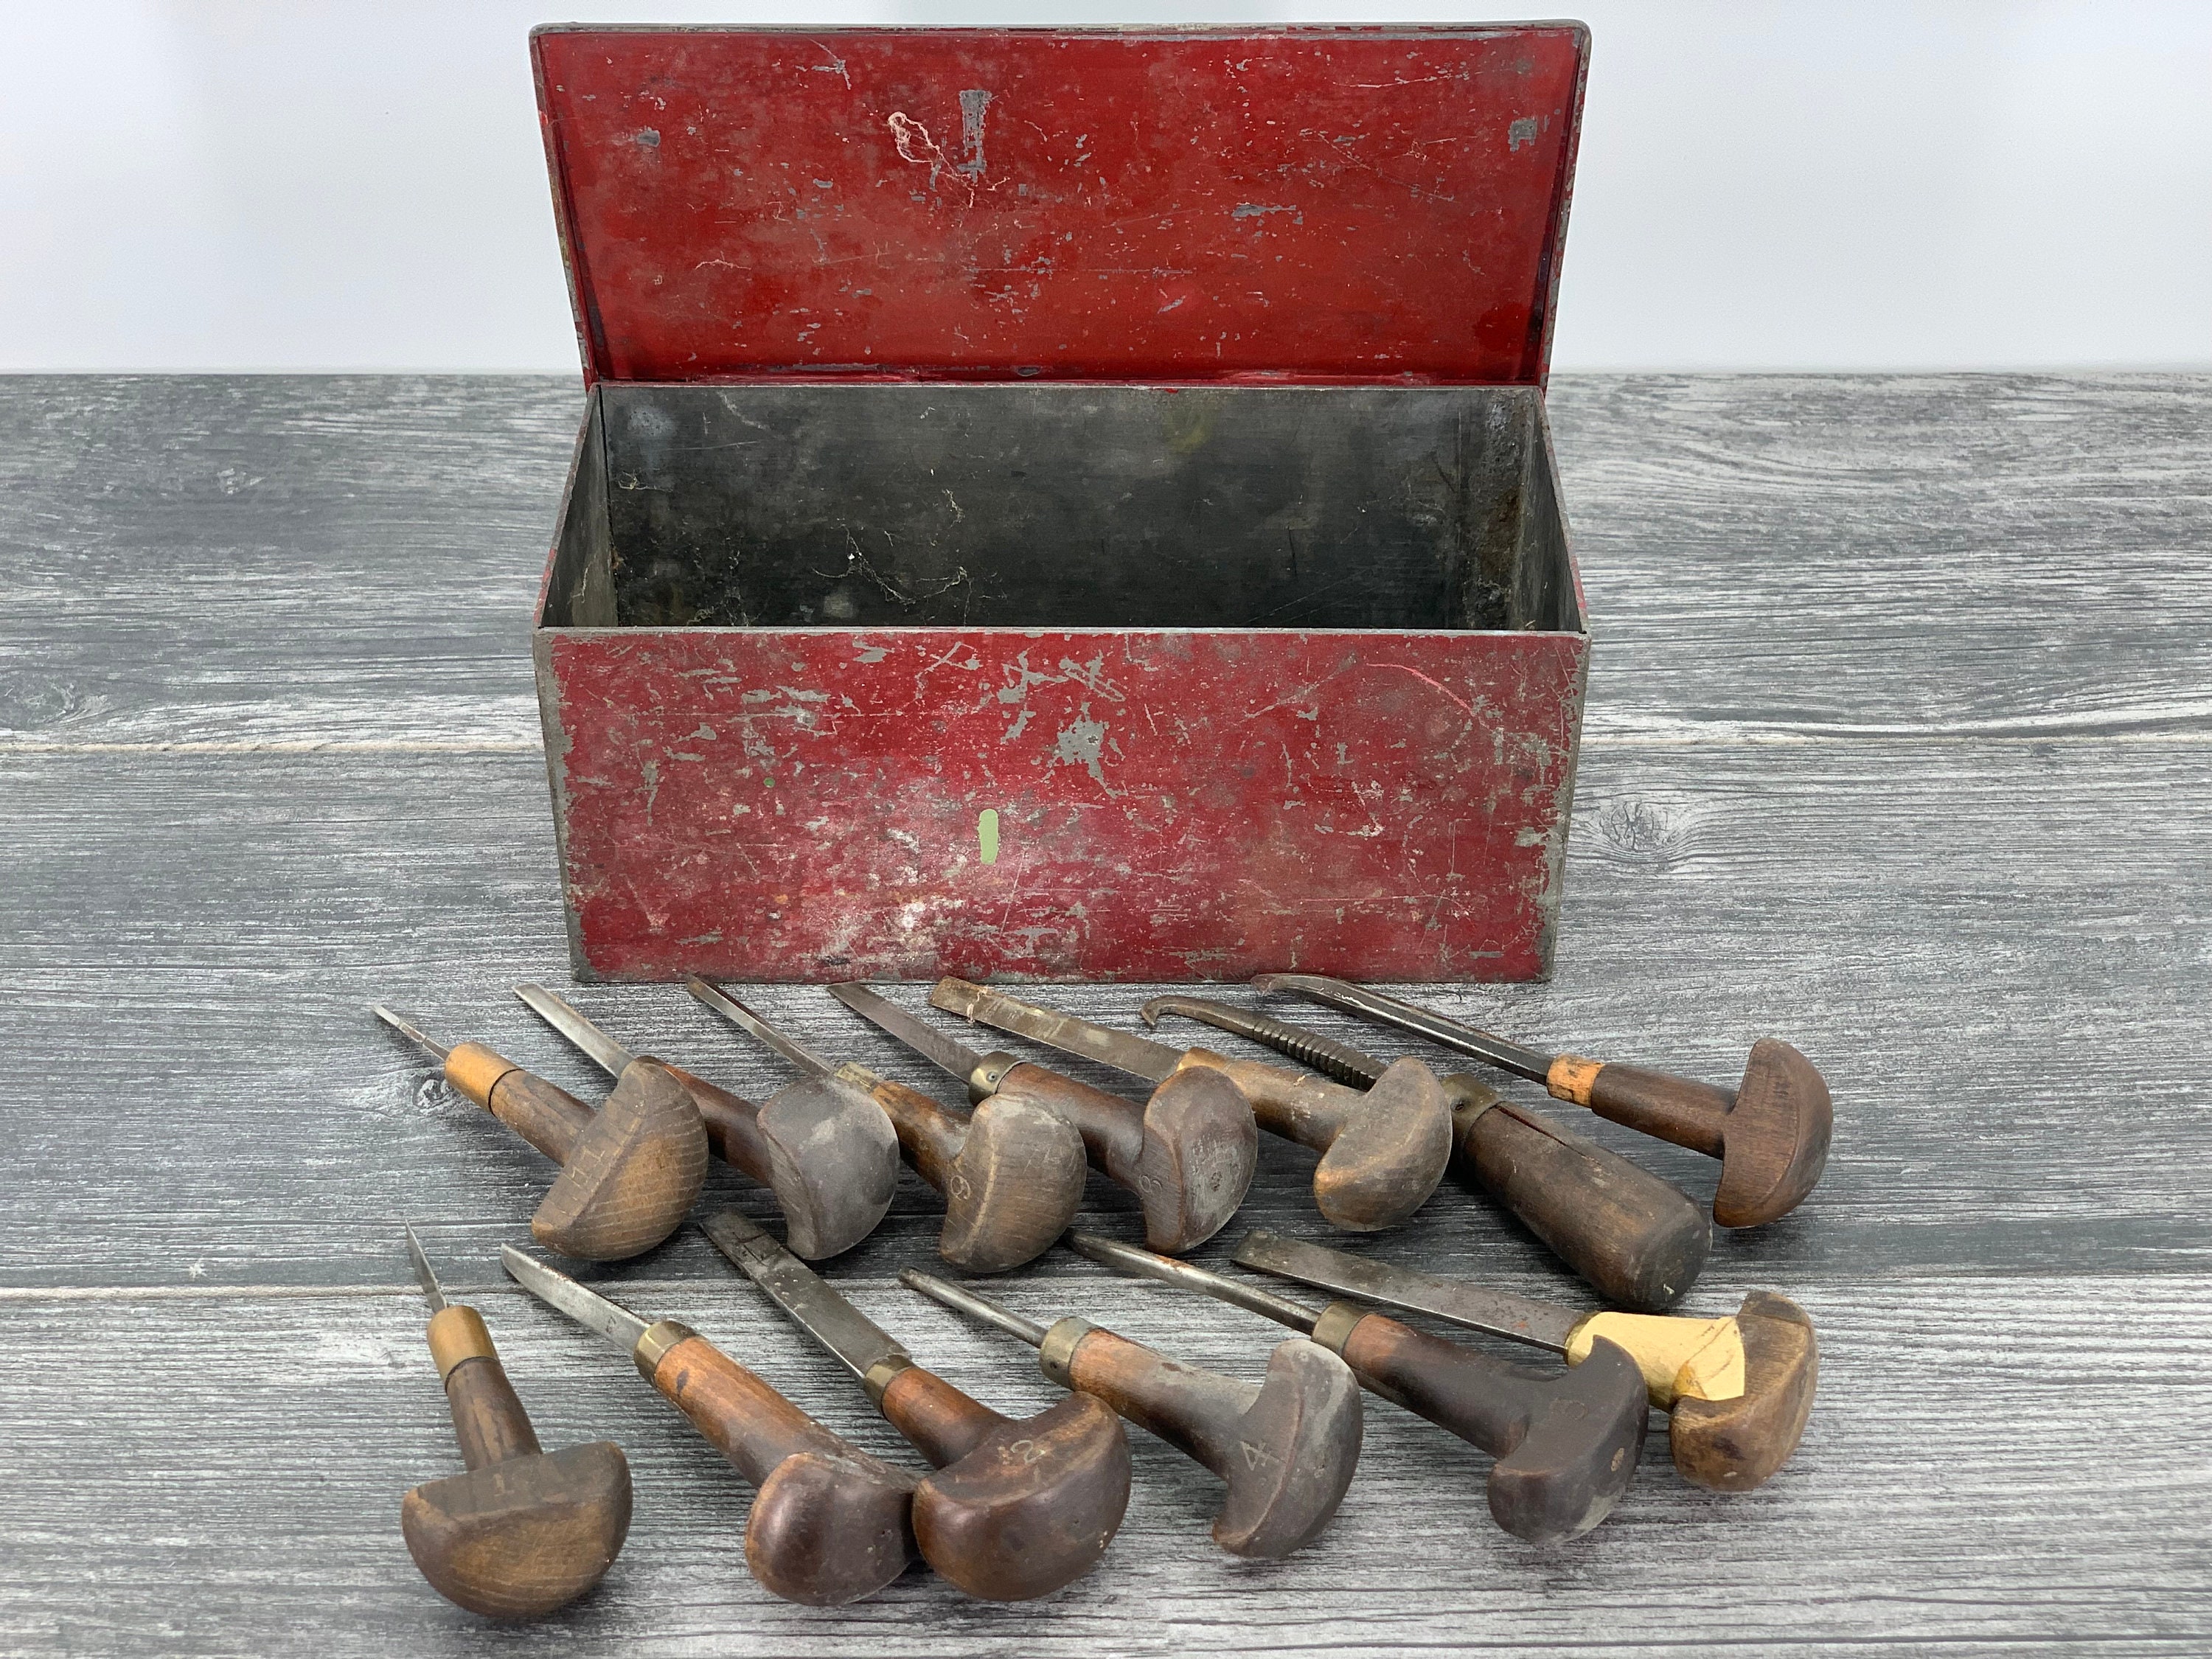 Suncraft Maruichi Wood Carving Woodblock Printing Tool Set, with